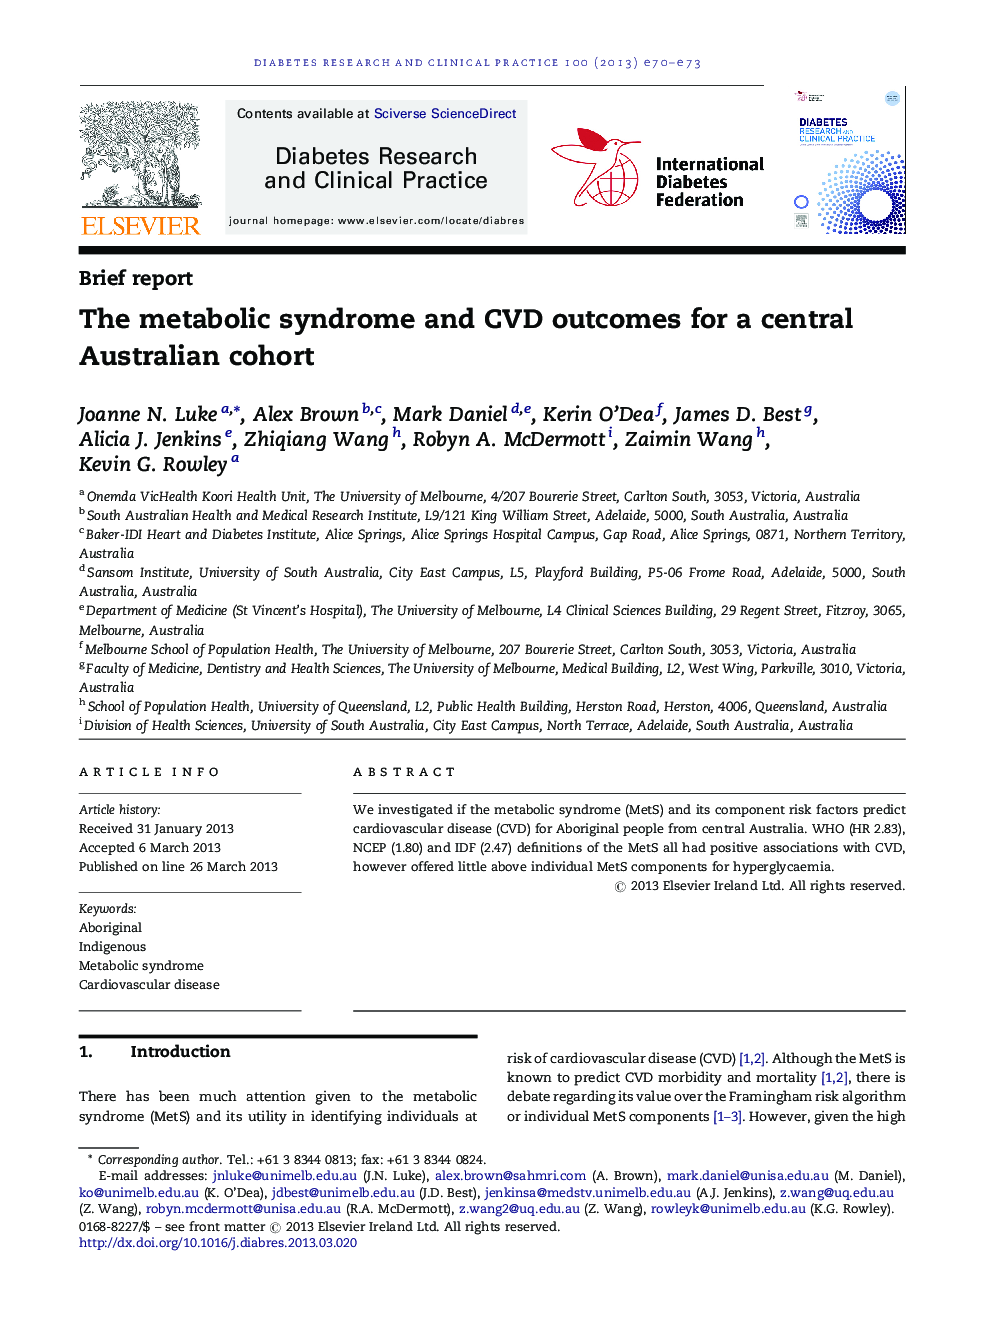 The metabolic syndrome and CVD outcomes for a central Australian cohort